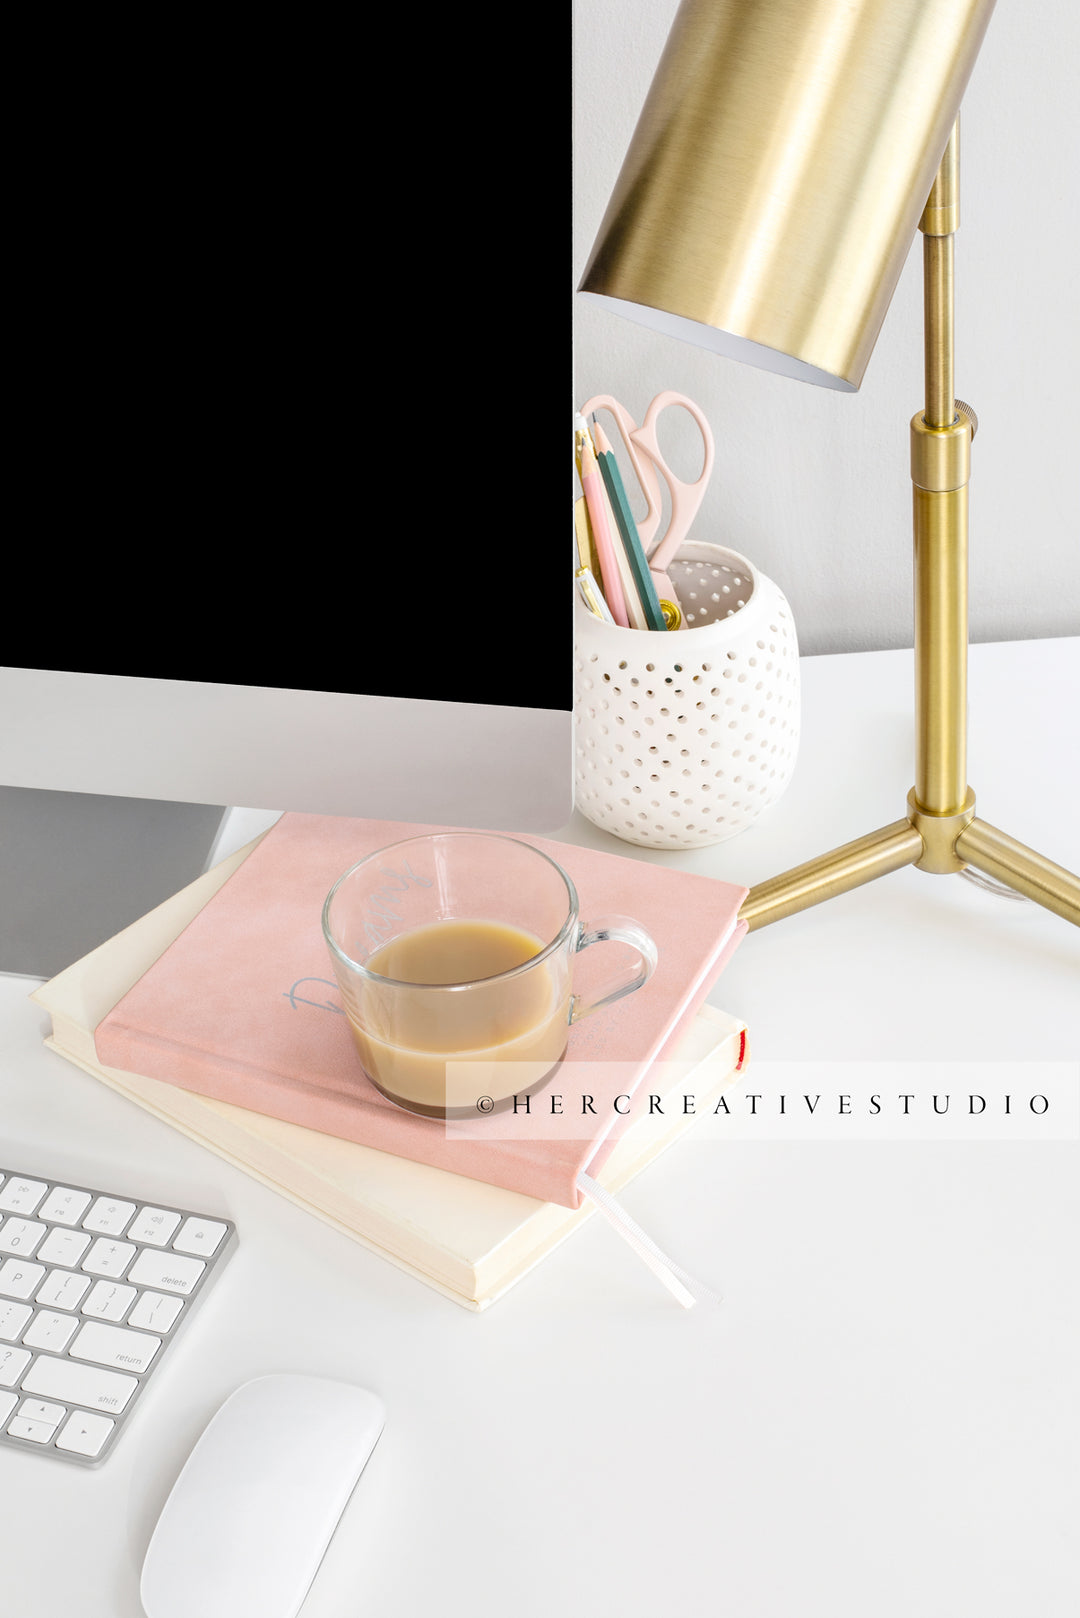 Computer, Coffee & Gold Lamp on Workspace, Styled Stock Image